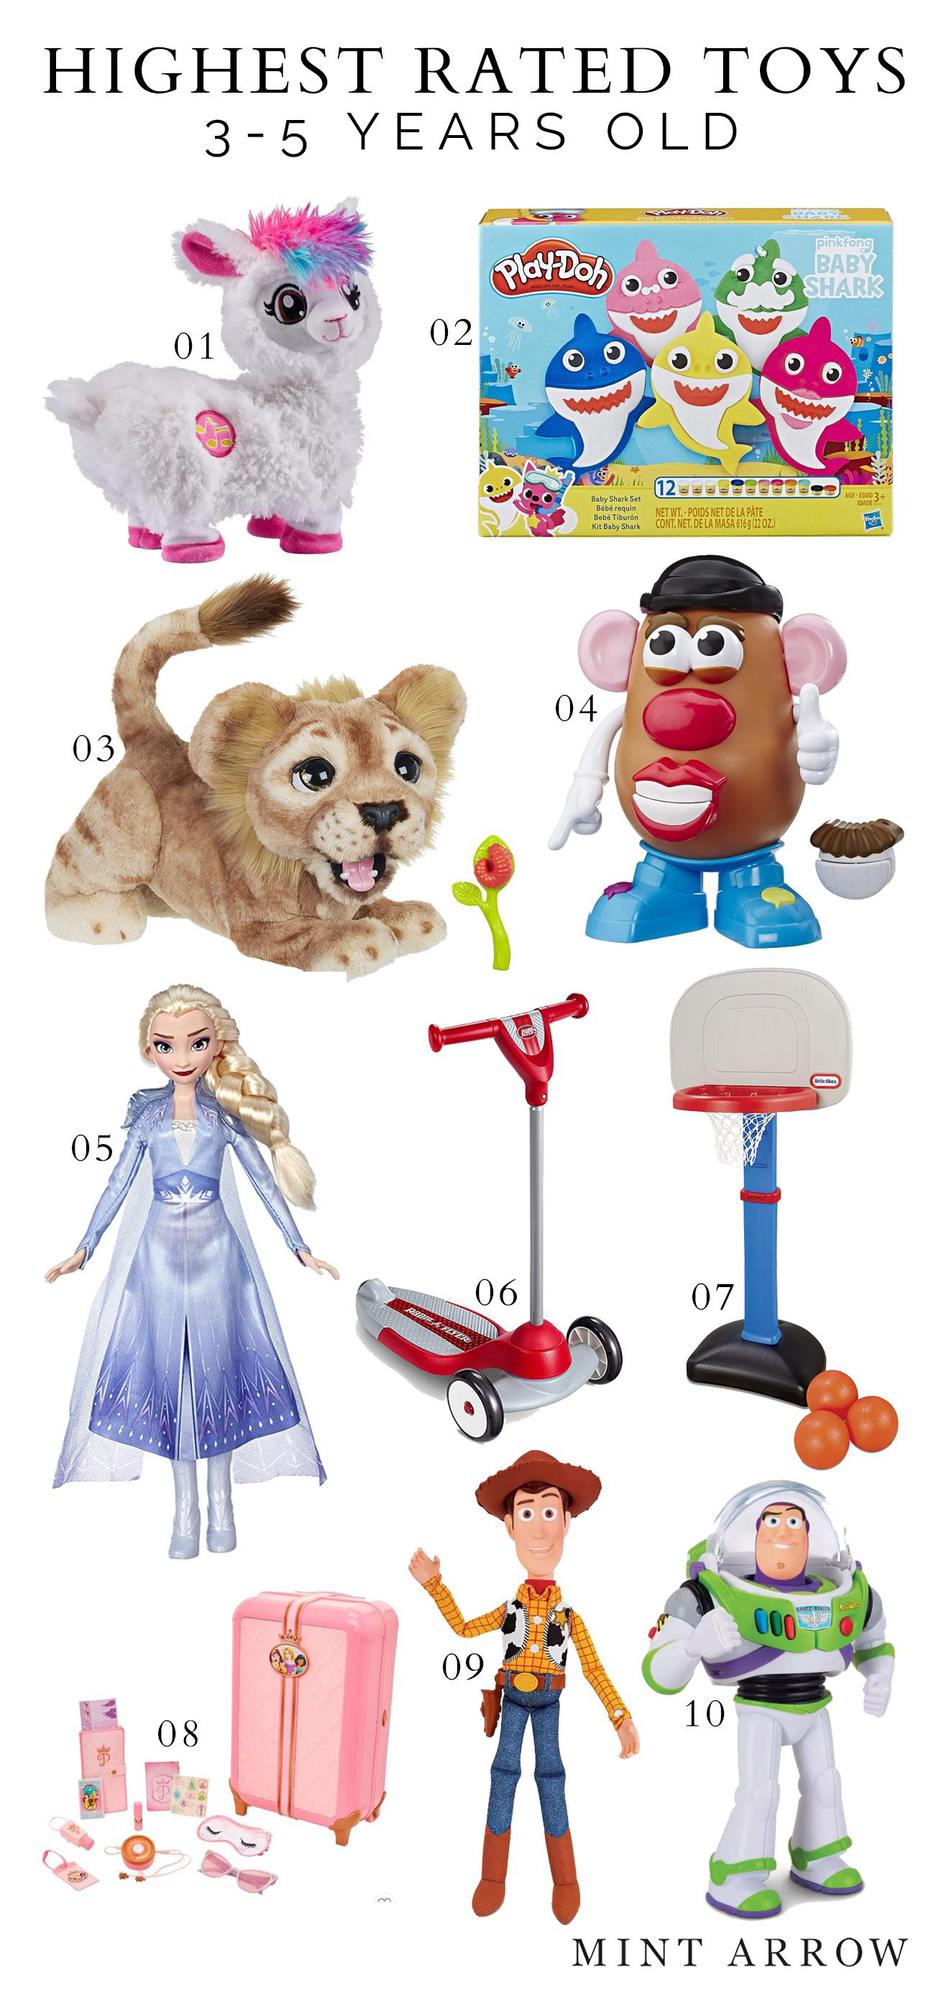 5 year old toys 2019